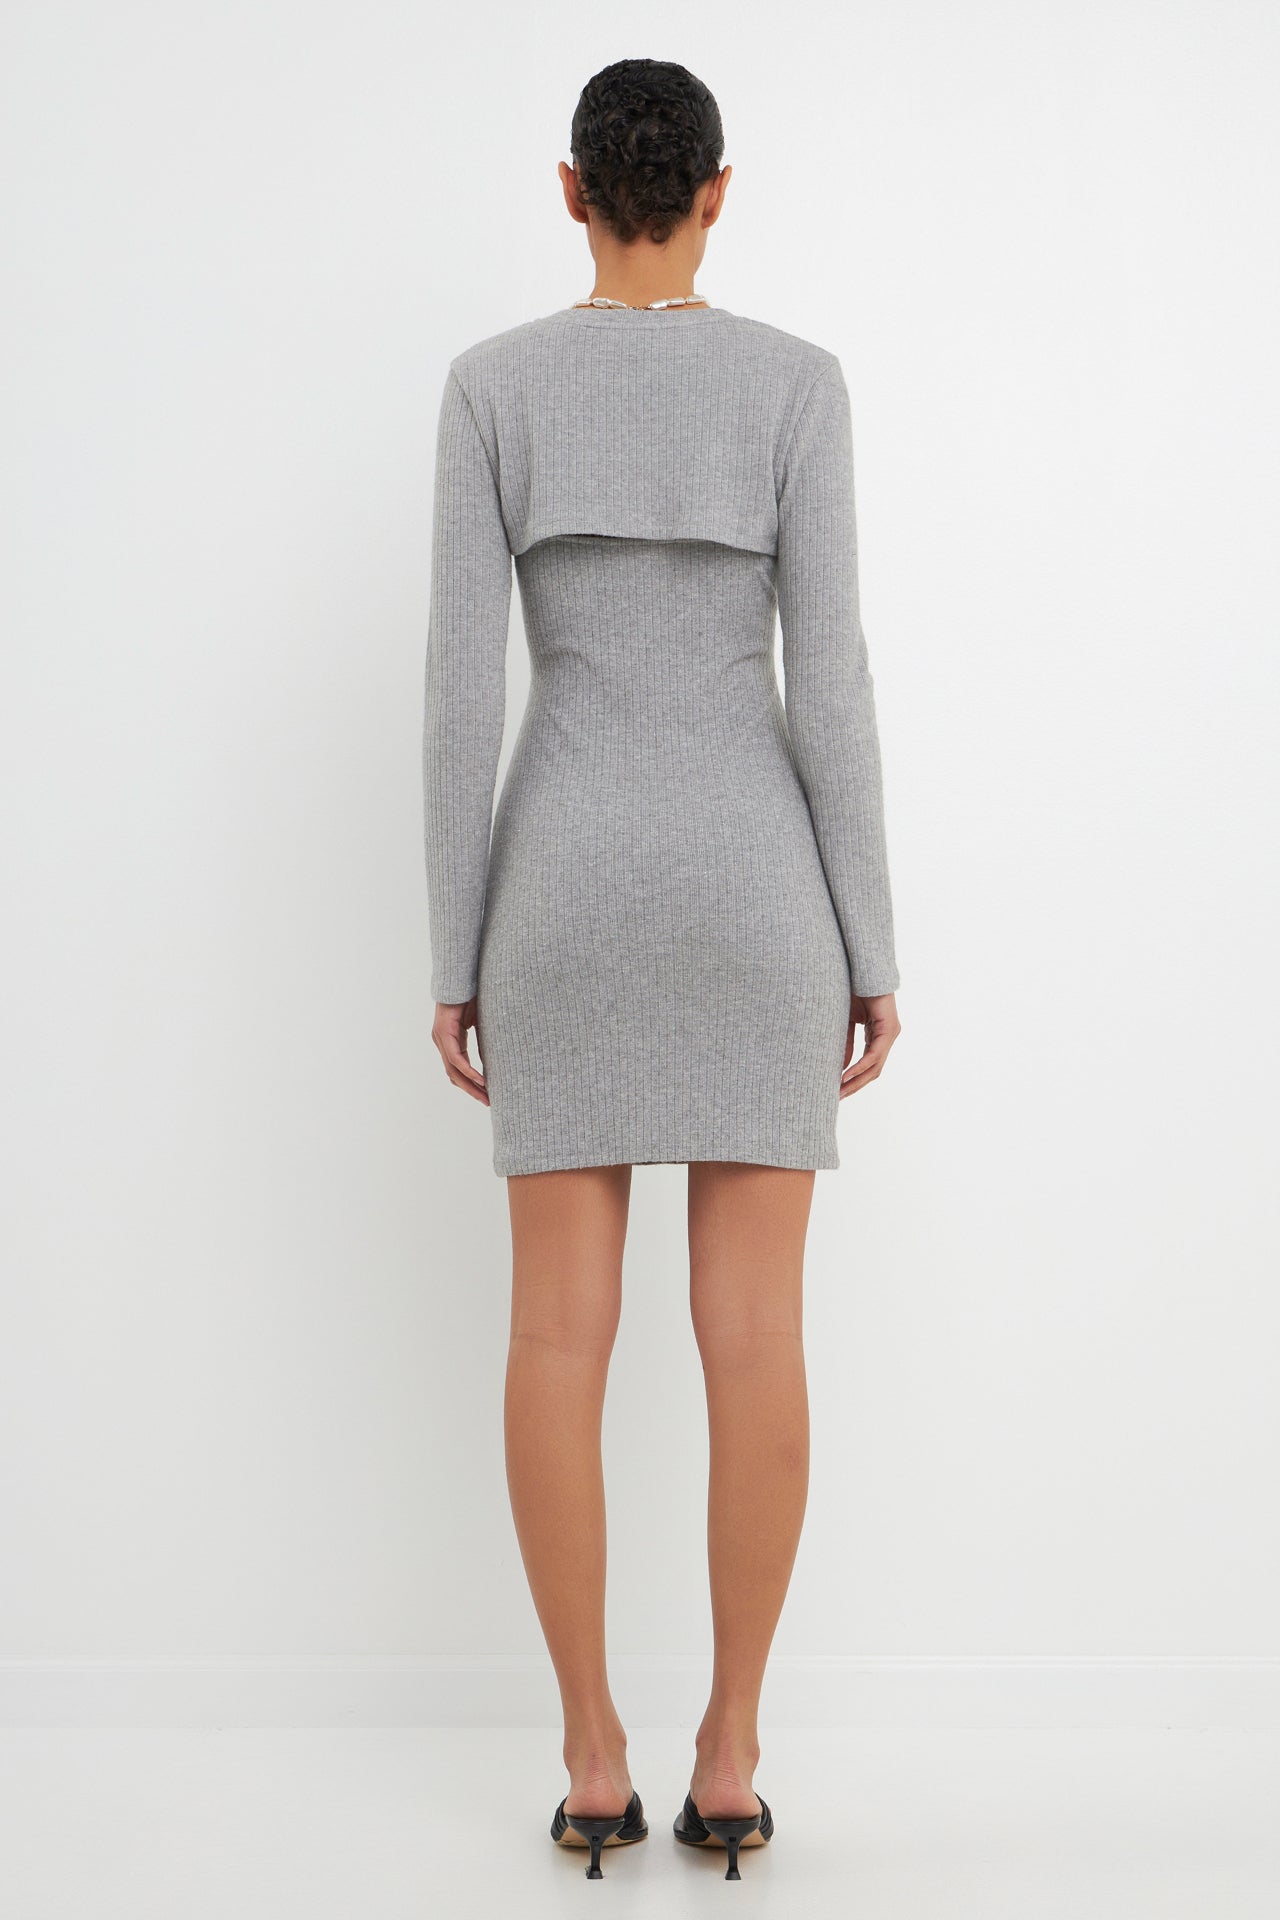 GREY LAB - Knit Top with Knit Mini Dress - DRESSES available at Objectrare